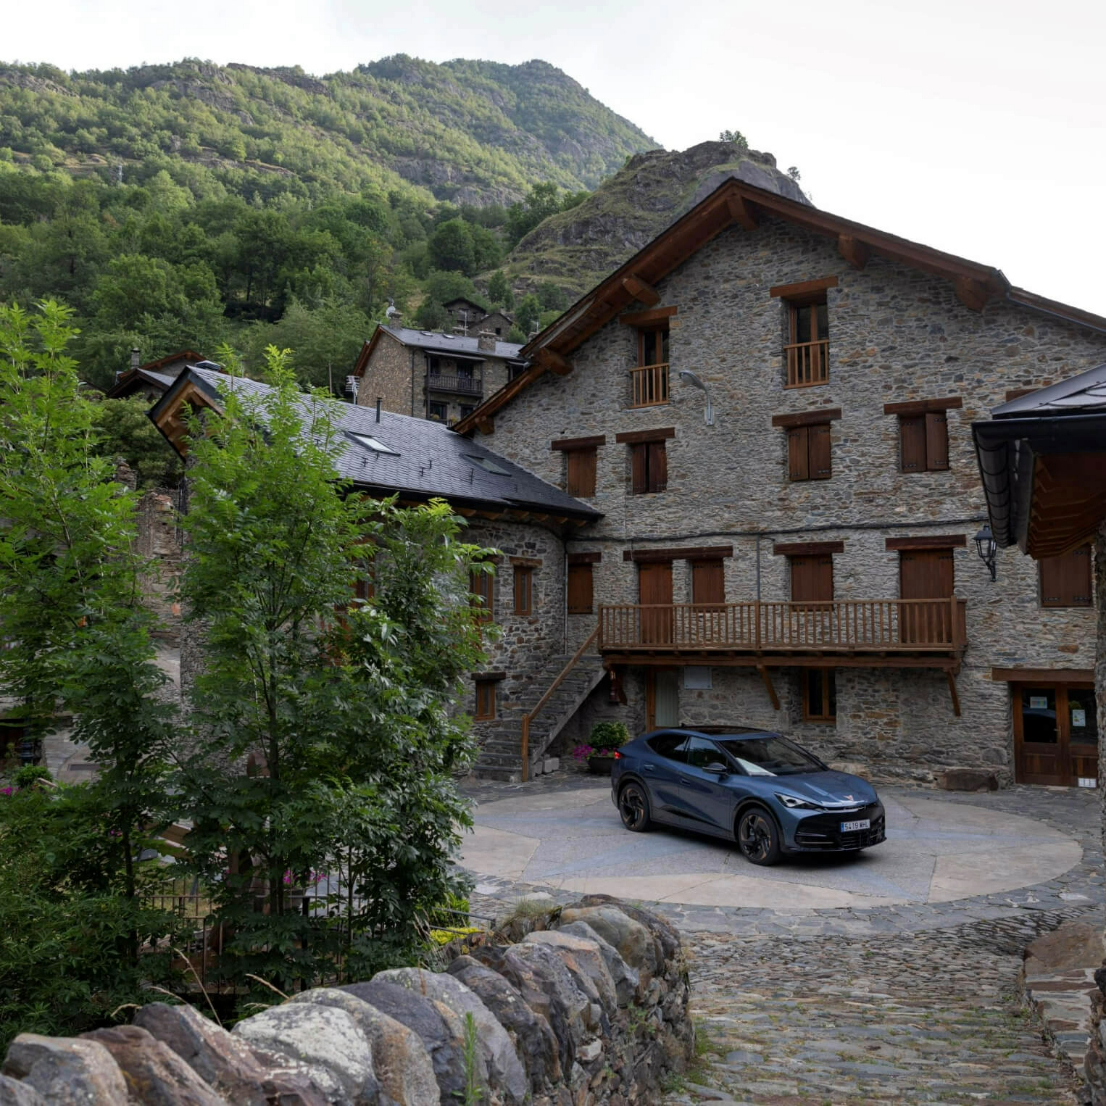 CUPRA Tavascan parked outside a mountain chalet